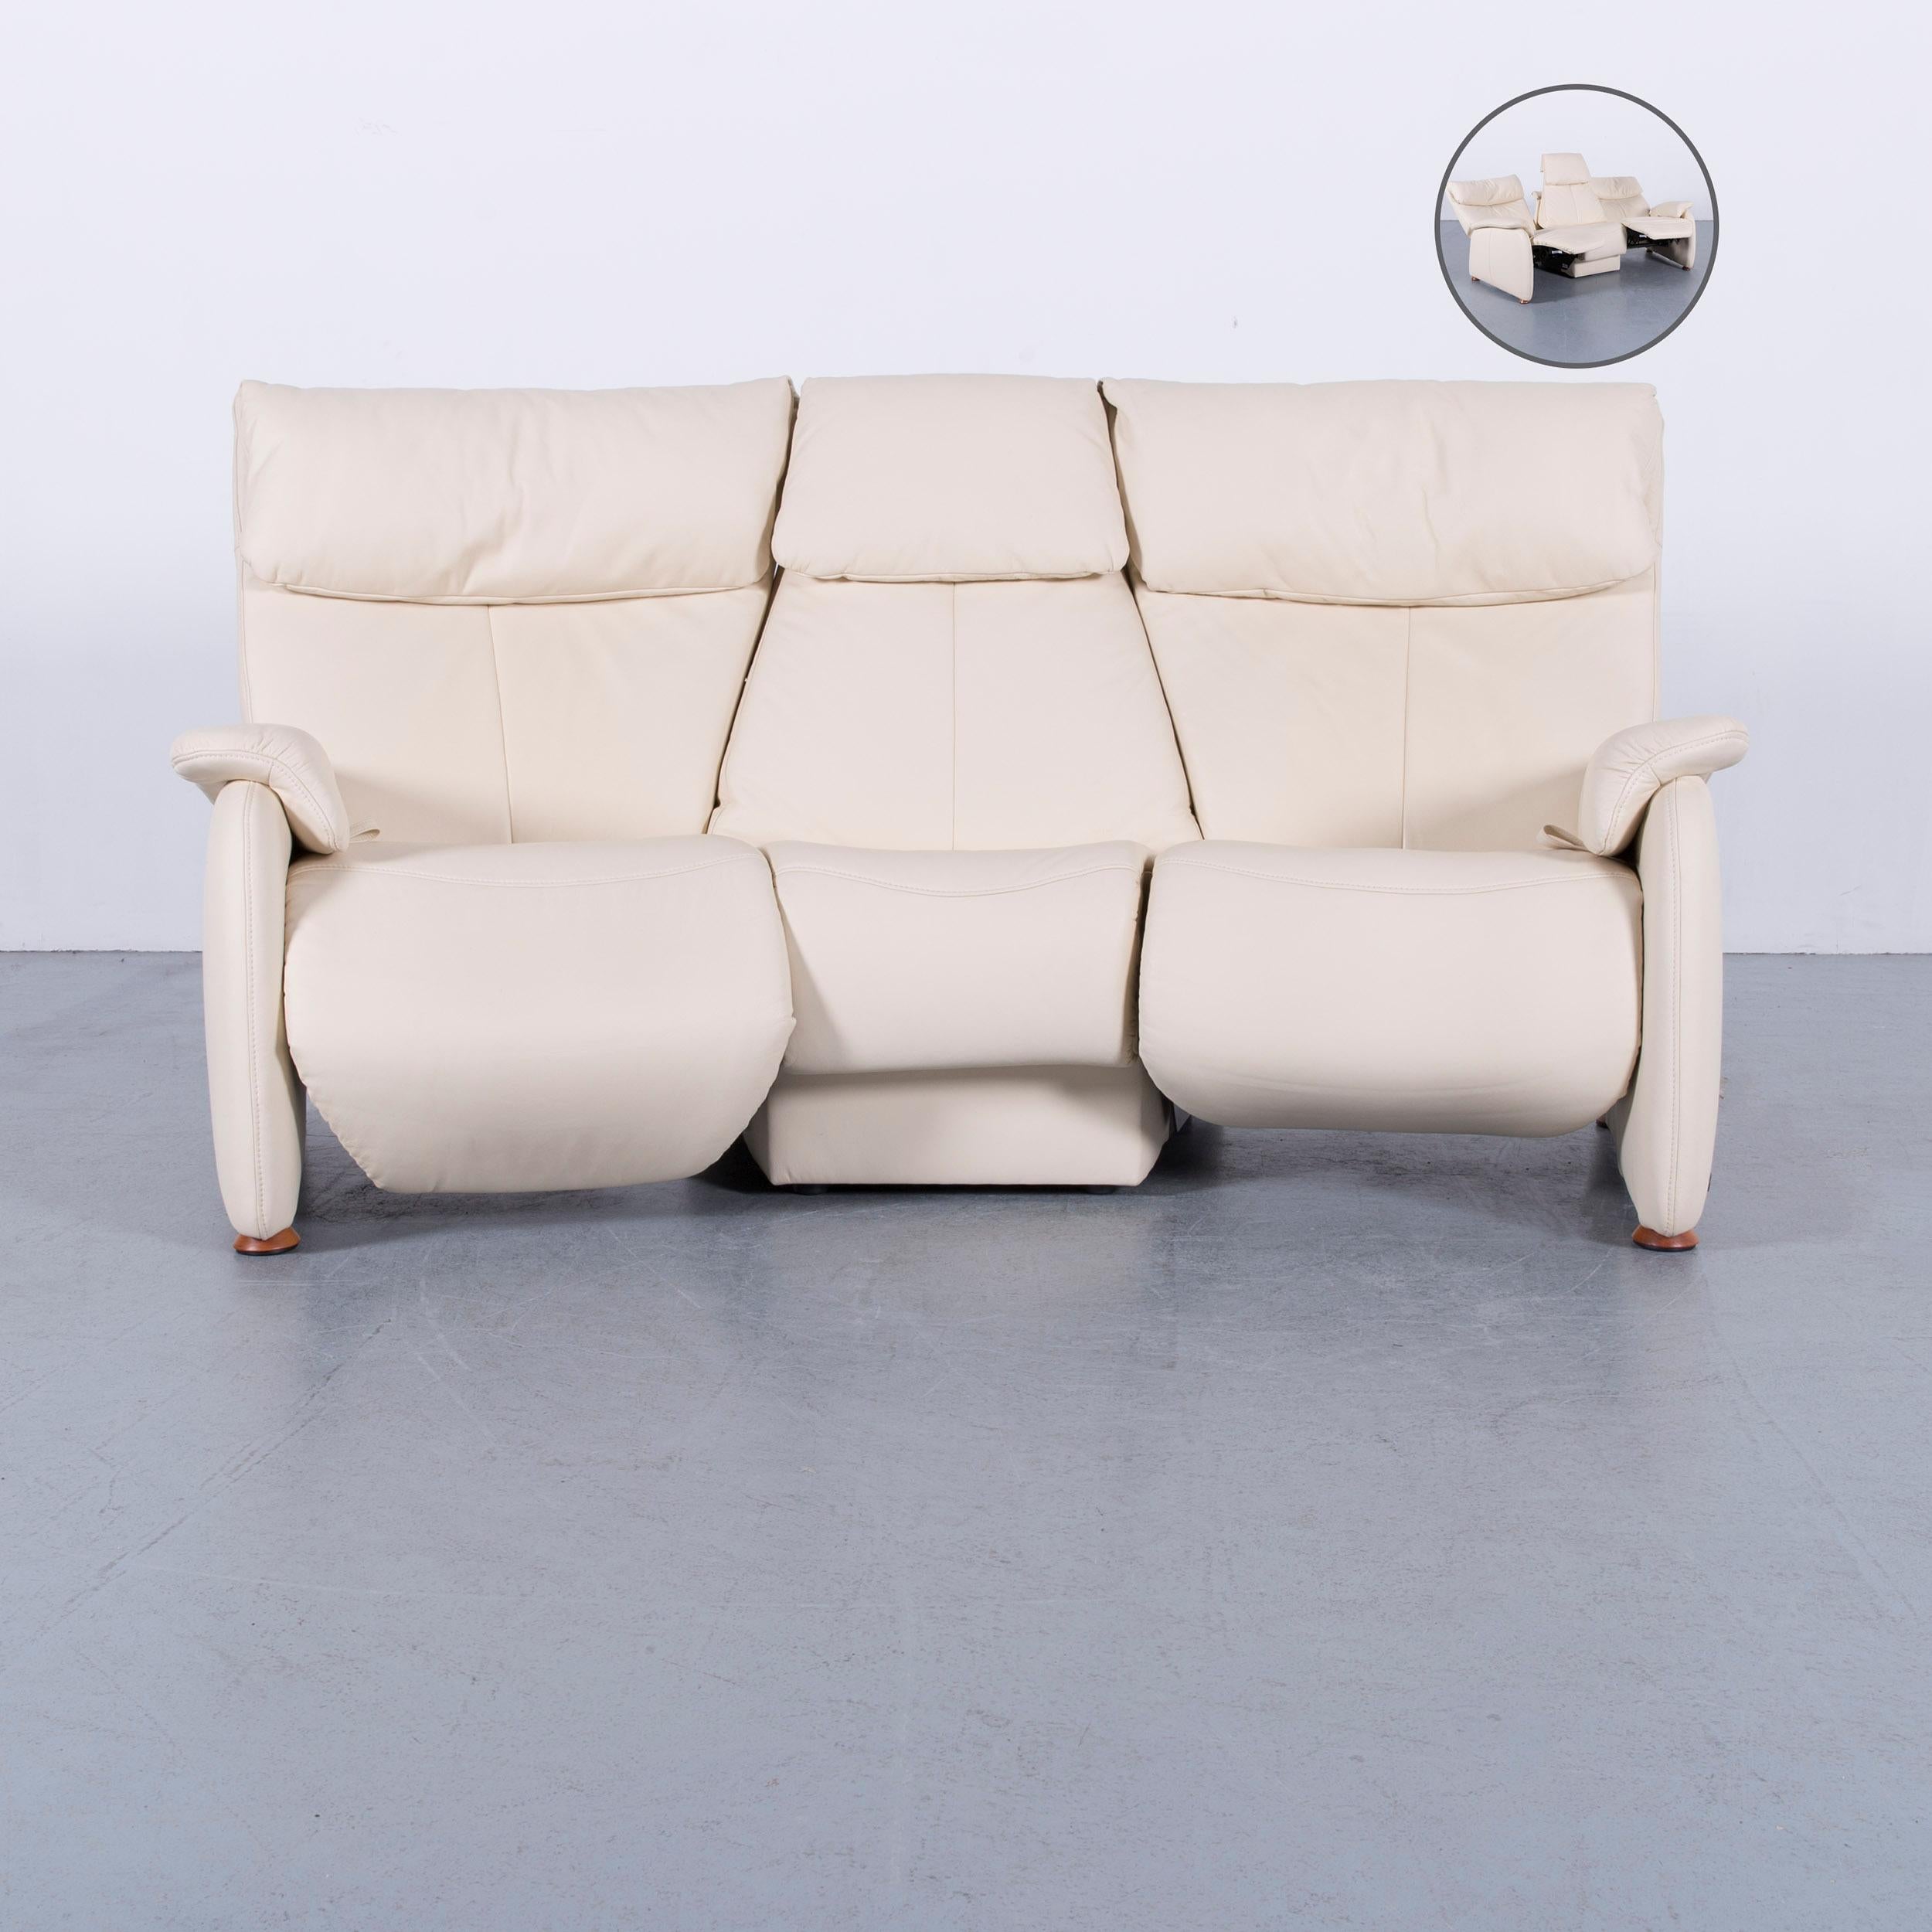 We bring to you an Himolla Trapez sofa off-white three-seat couch recliner.




























